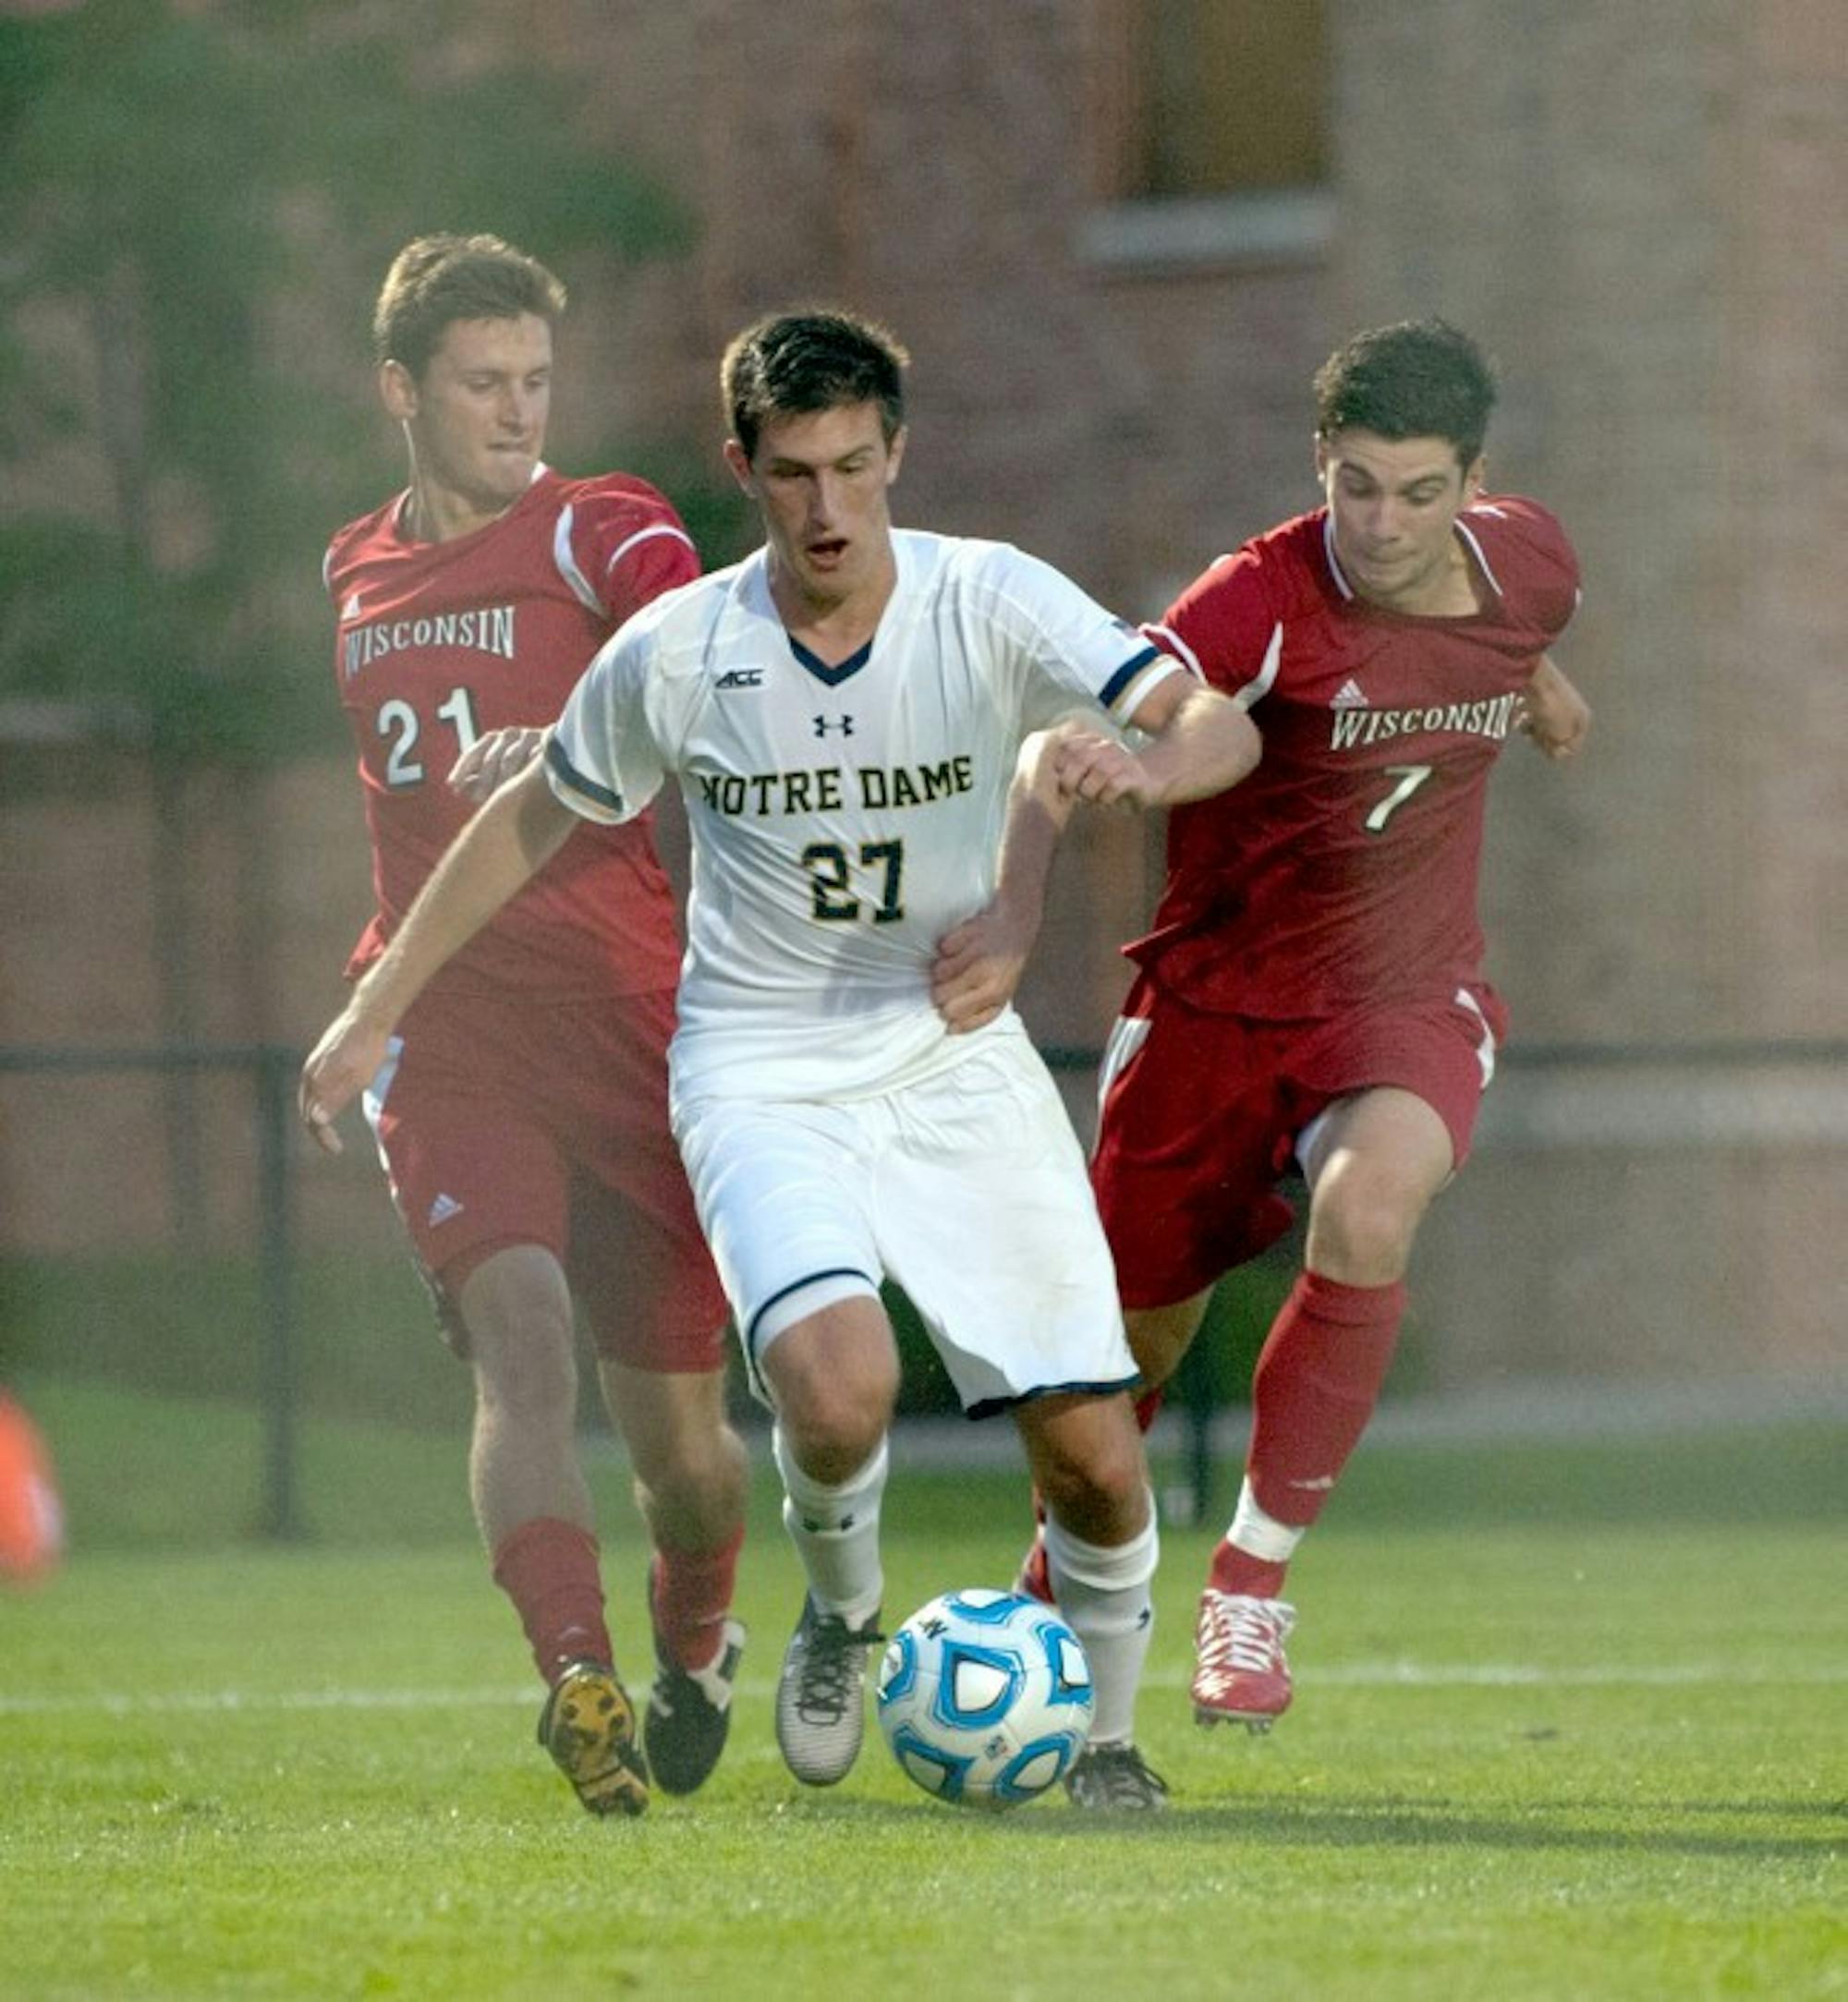 Irish junior midfielder Patrick Hodan dribbles between two Wisconsin players in Monday’s 5-1 win over No. 21 Wisconsin. Hodan tallied a goal in the  29th minute and an assist in the match’s 49th minute.